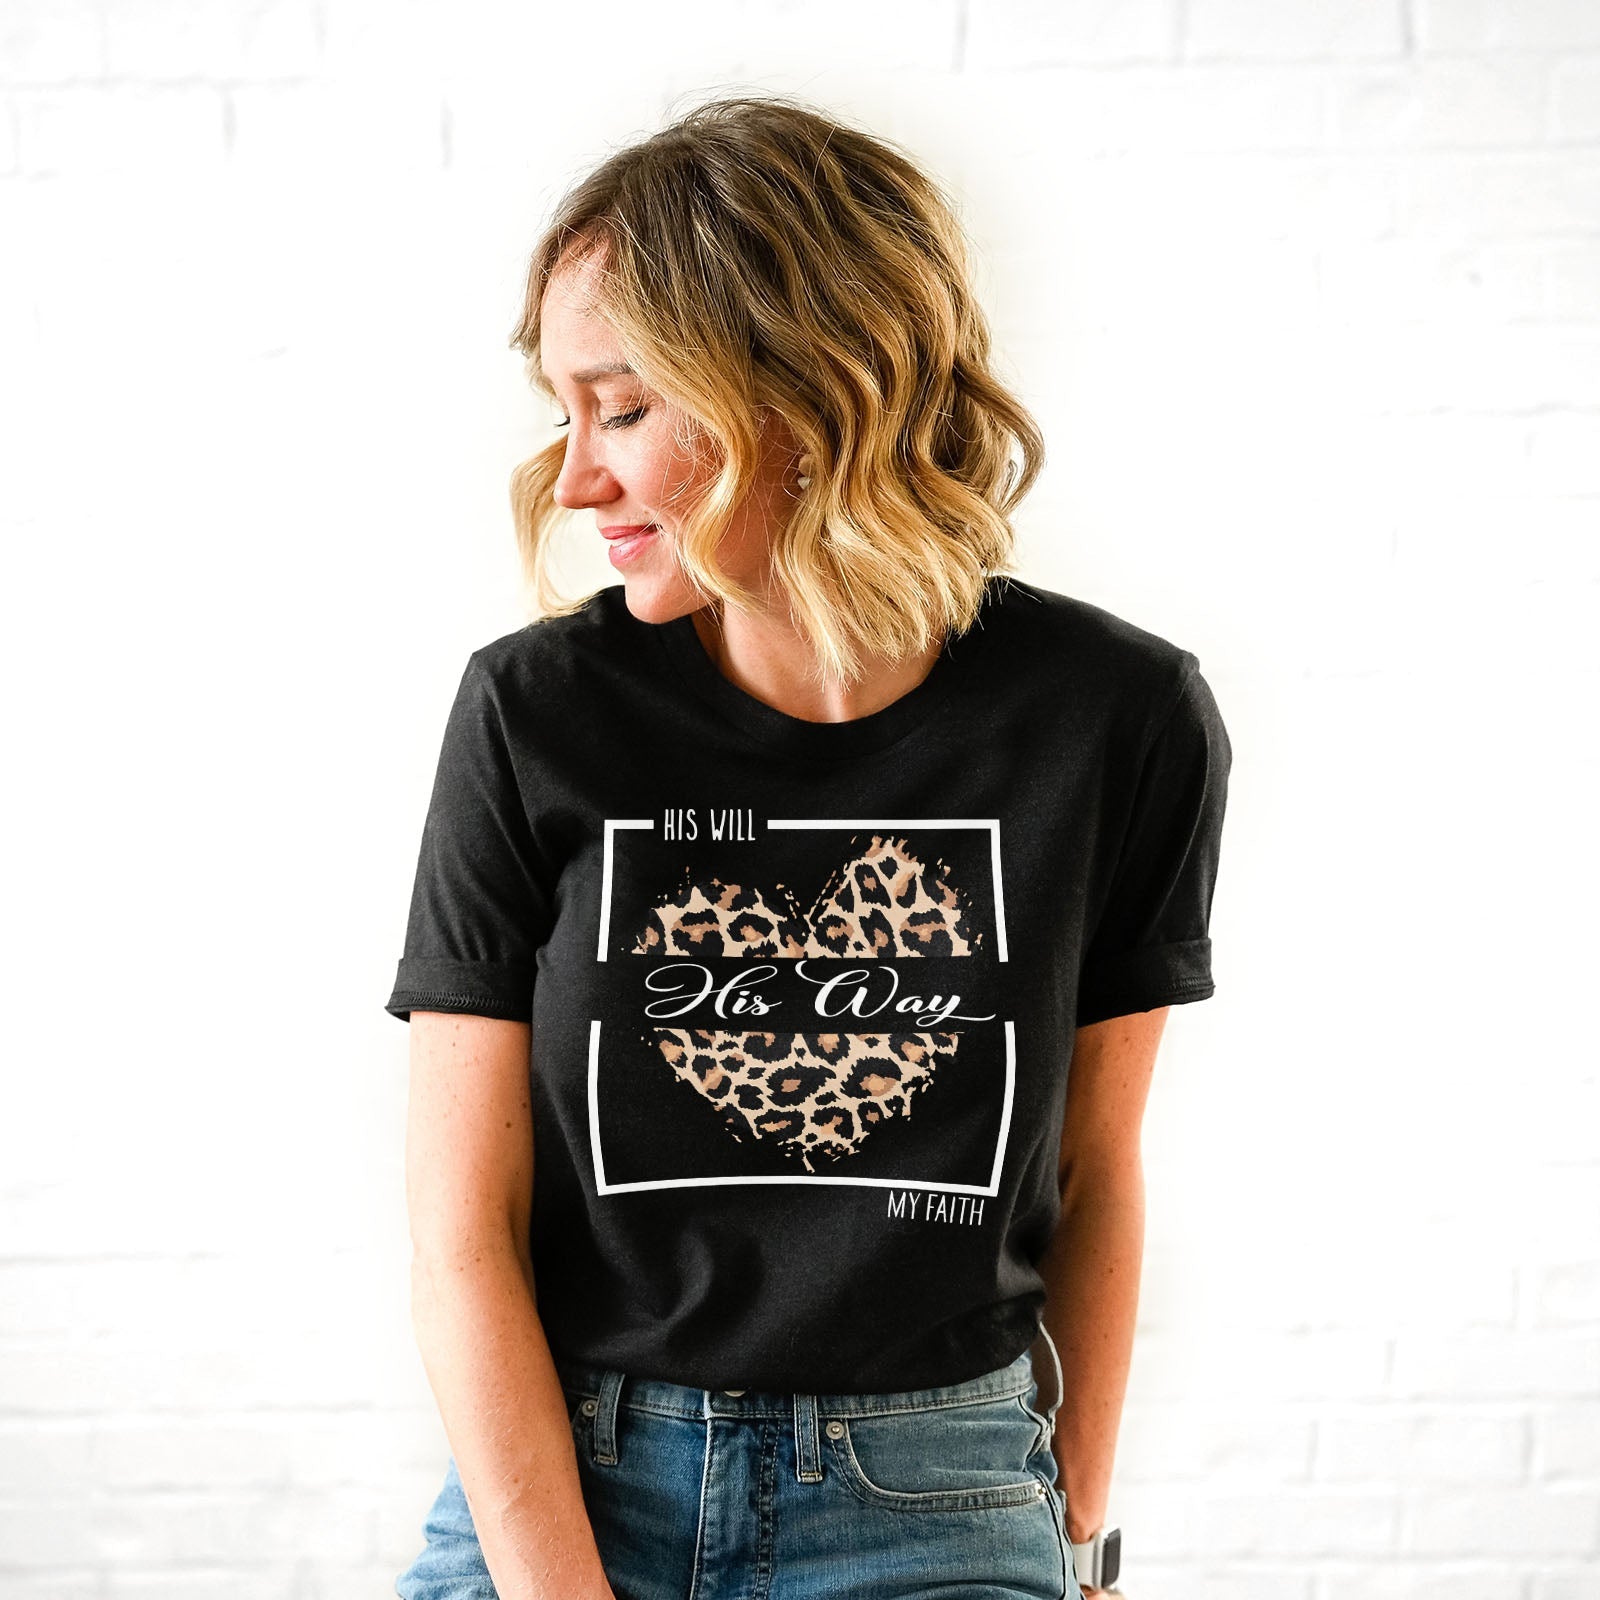 His Will His Way My Faith Tee Shirts For Women - Christian Shirts for Women - Religious Tee Shirts